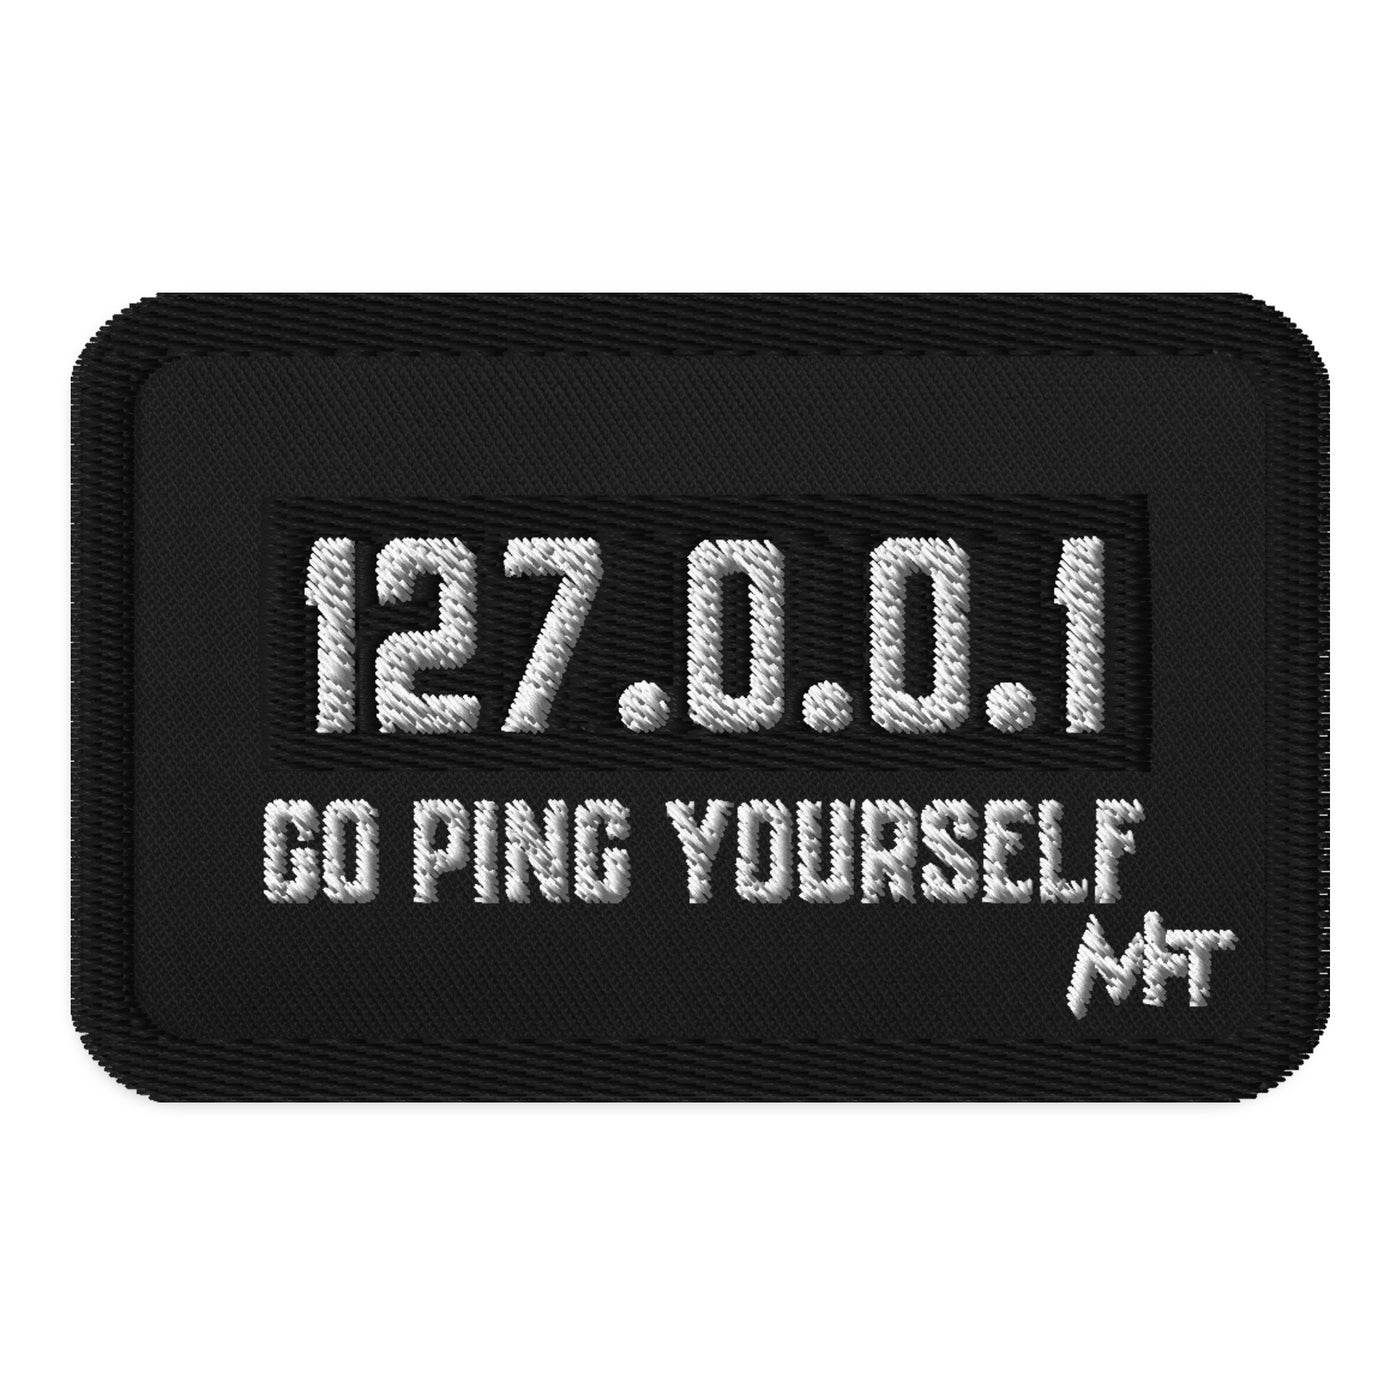 Go ping yourself - Embroidered patches